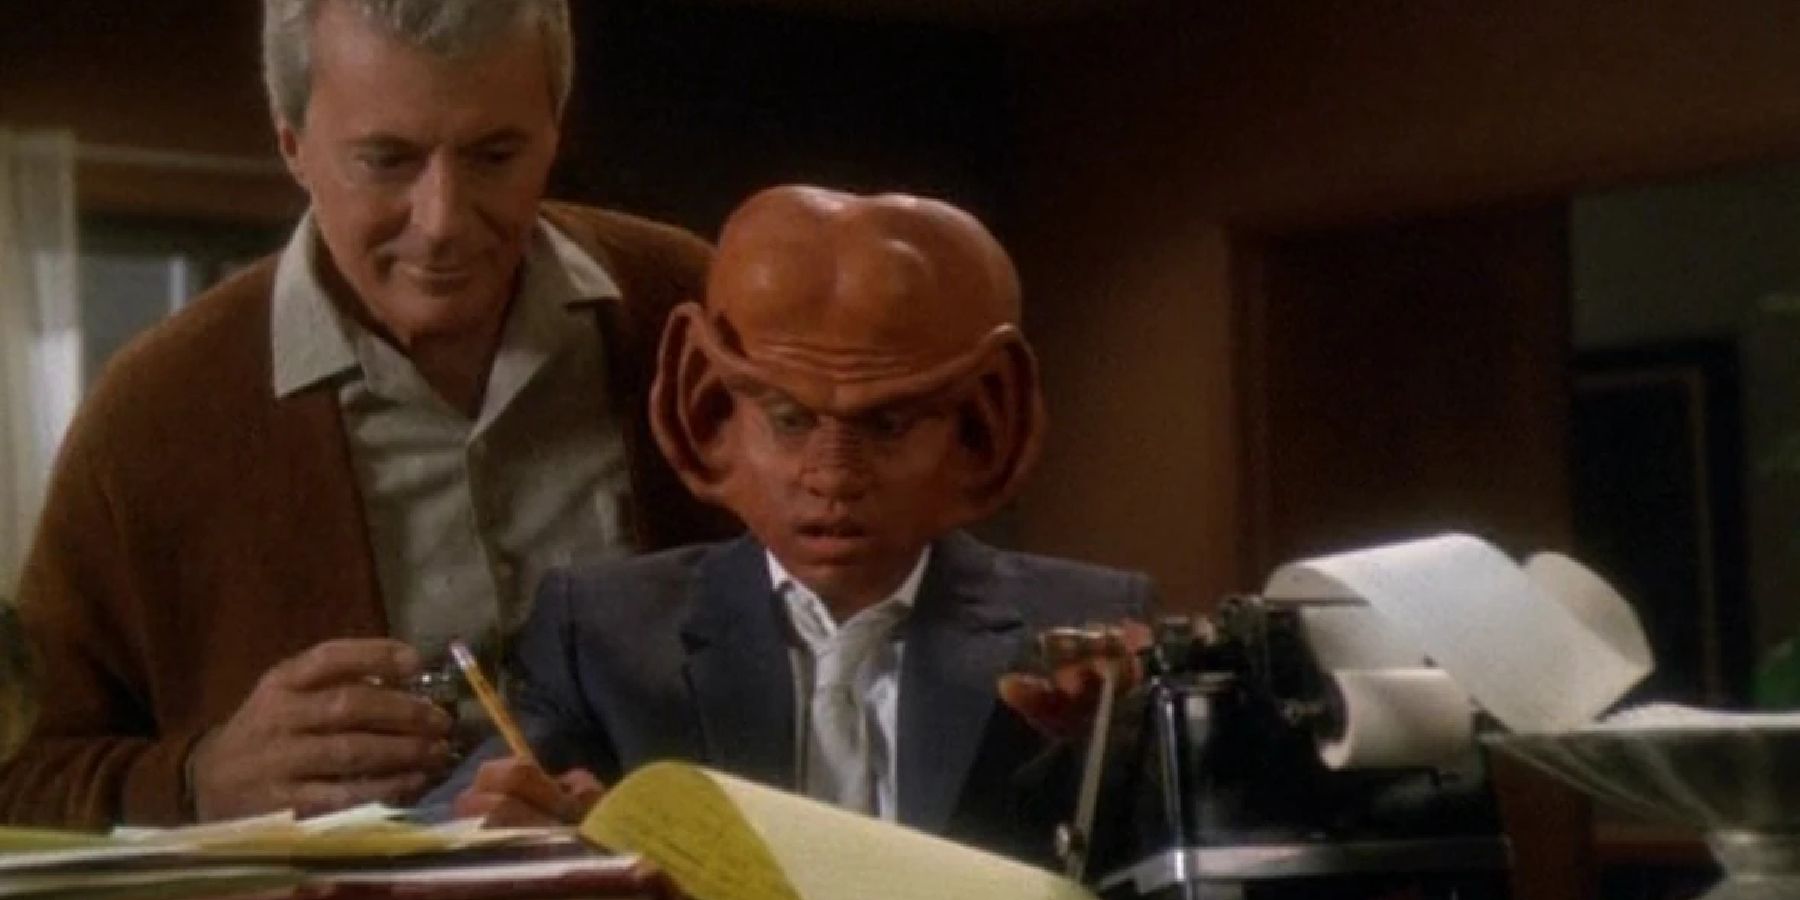 James Darren as Vic Fontaine and Aron Eisenberg as Nog